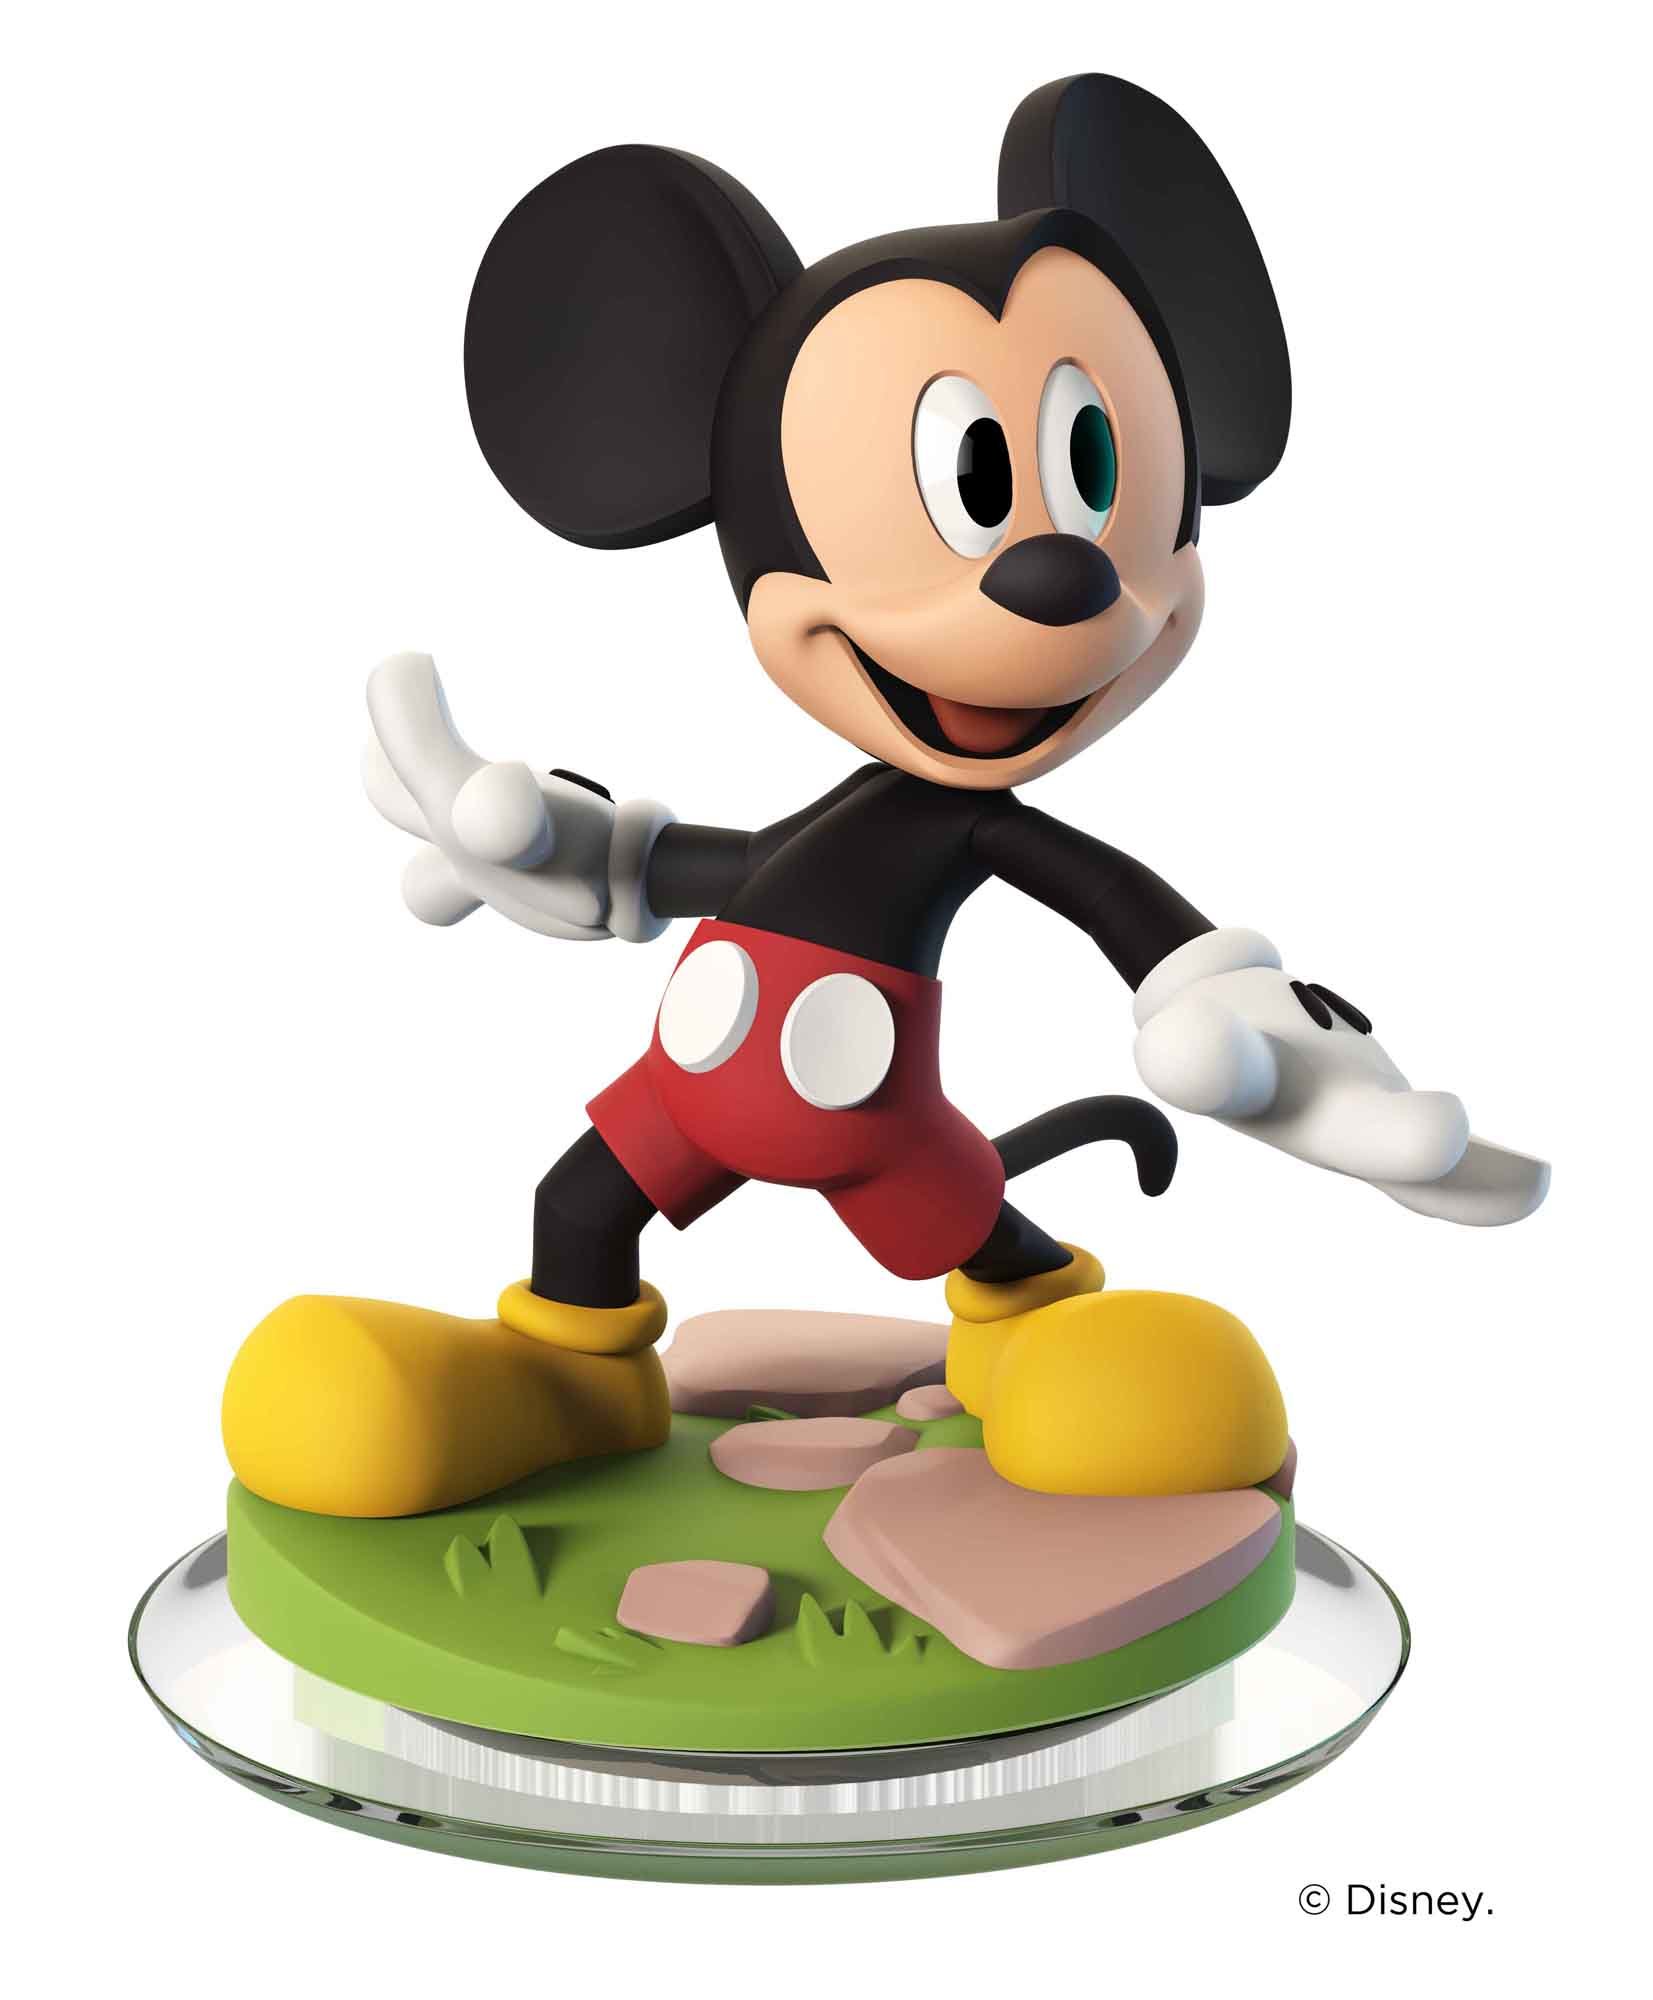 Fine Art: Disney Infinity’s Toys Are Just The Best